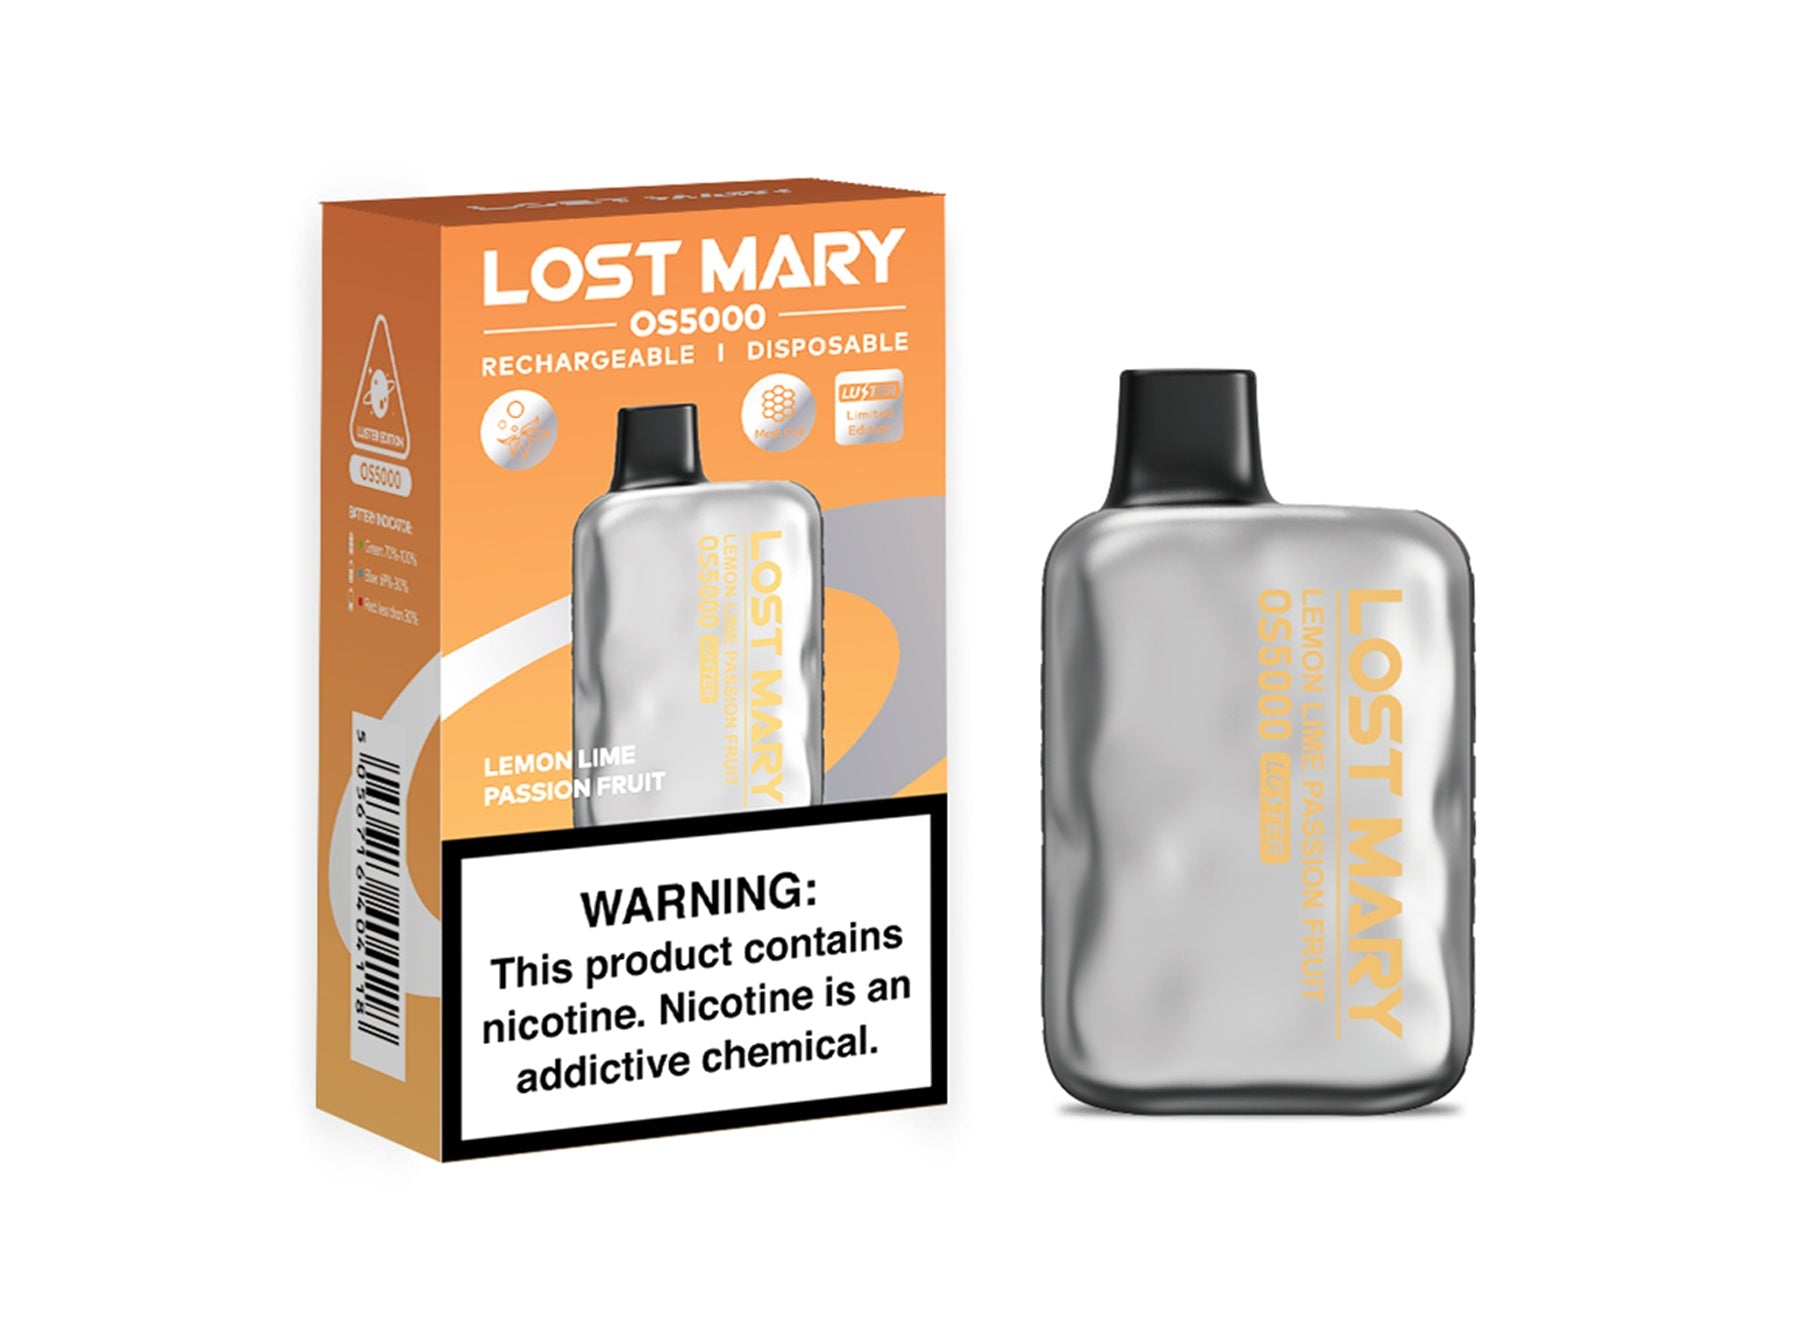 Lost Mary OS5000 - Lemon Lime Passion Fruit